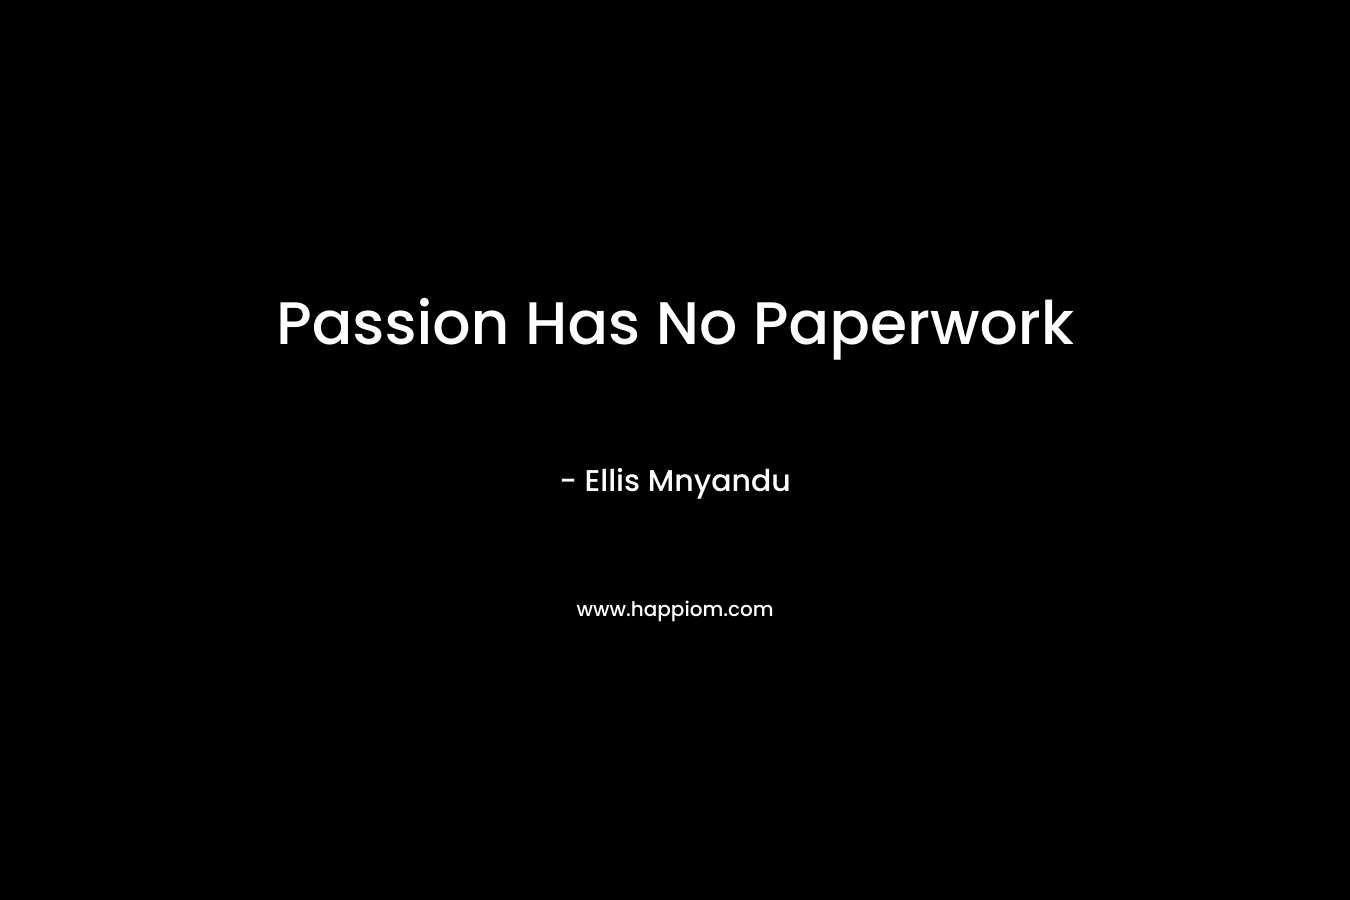 Passion Has No Paperwork